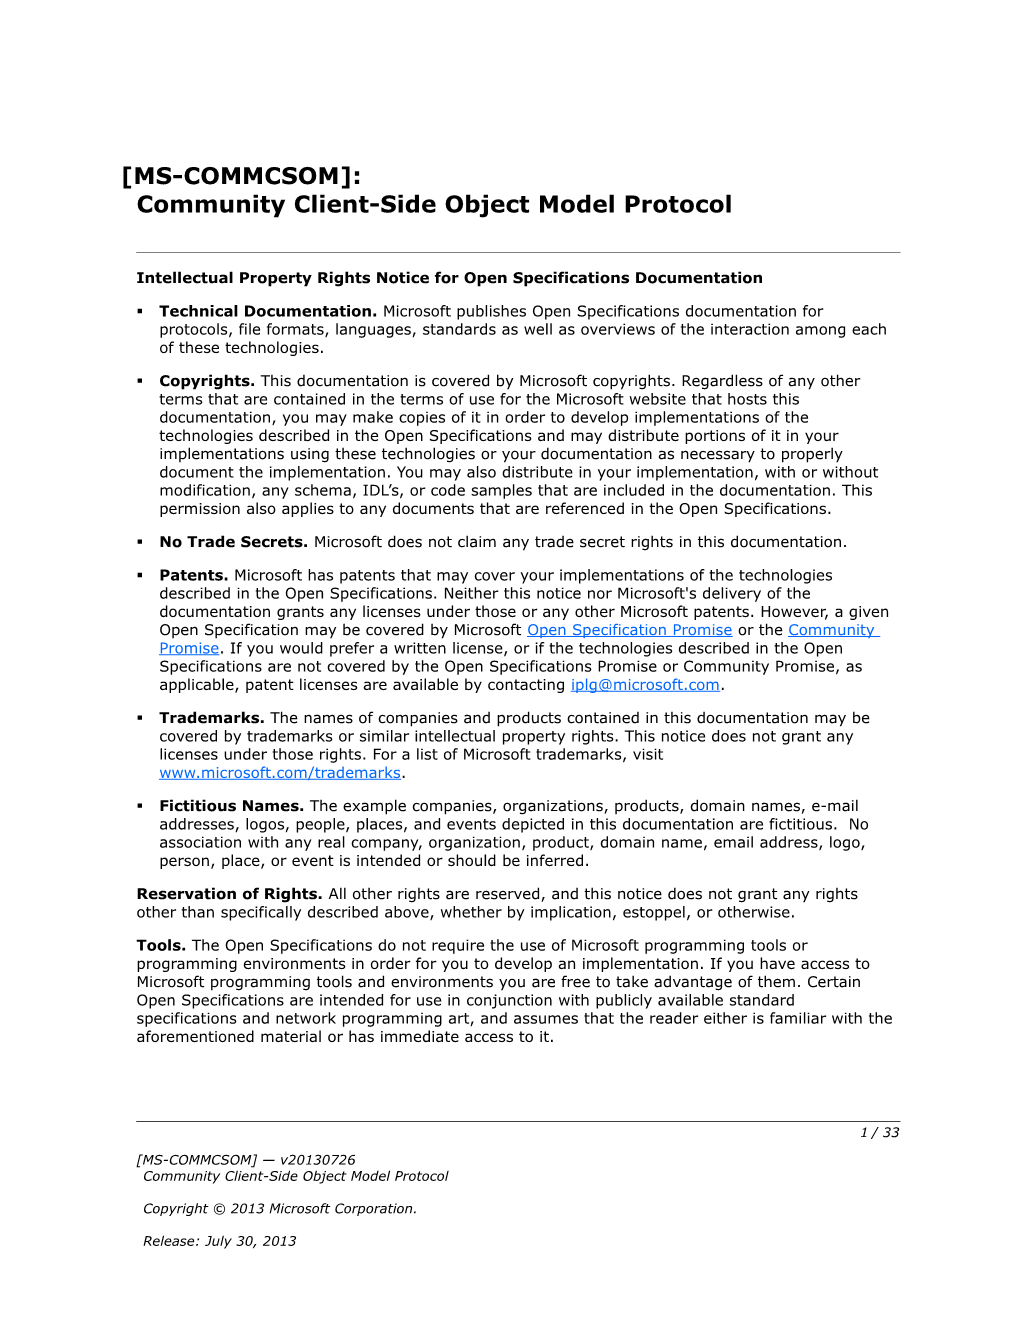 Intellectual Property Rights Notice for Open Specifications Documentation s16